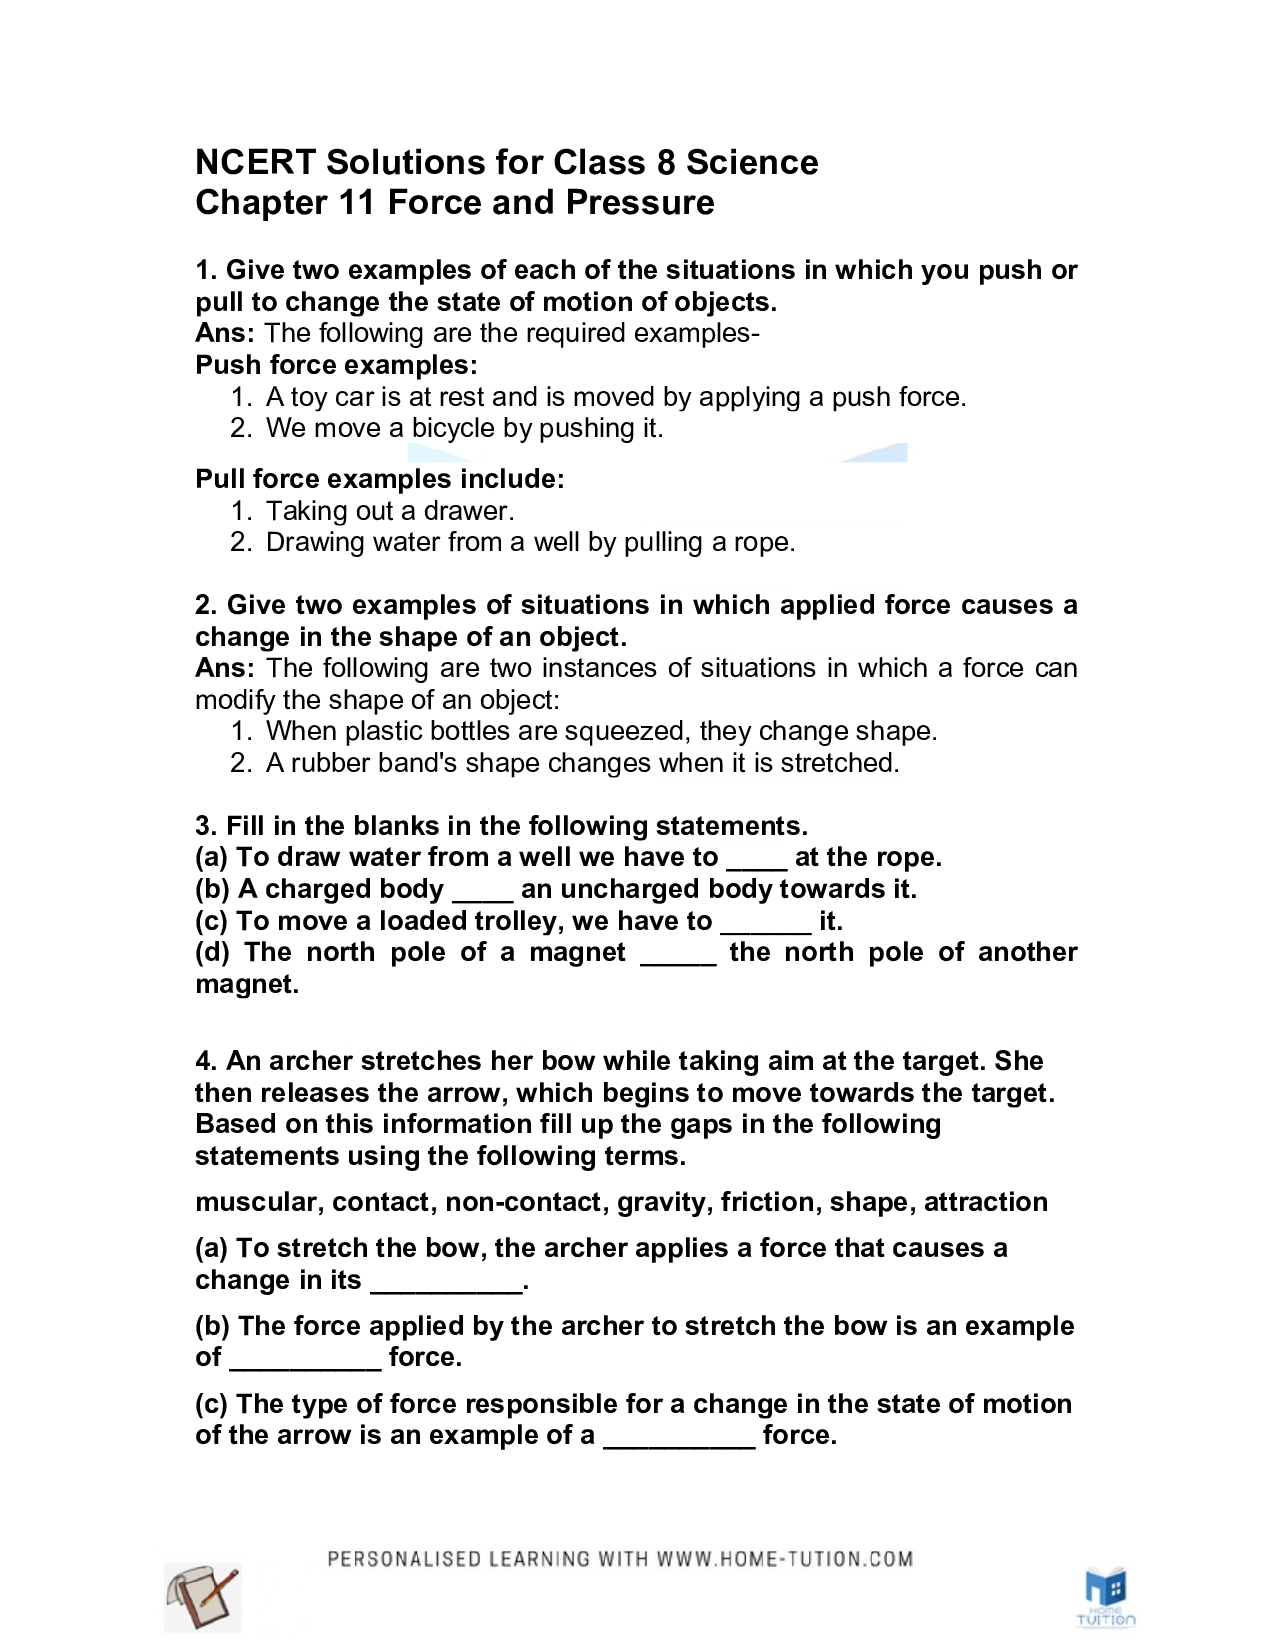 Class 8 Science Chapter 11 Force and Pressure